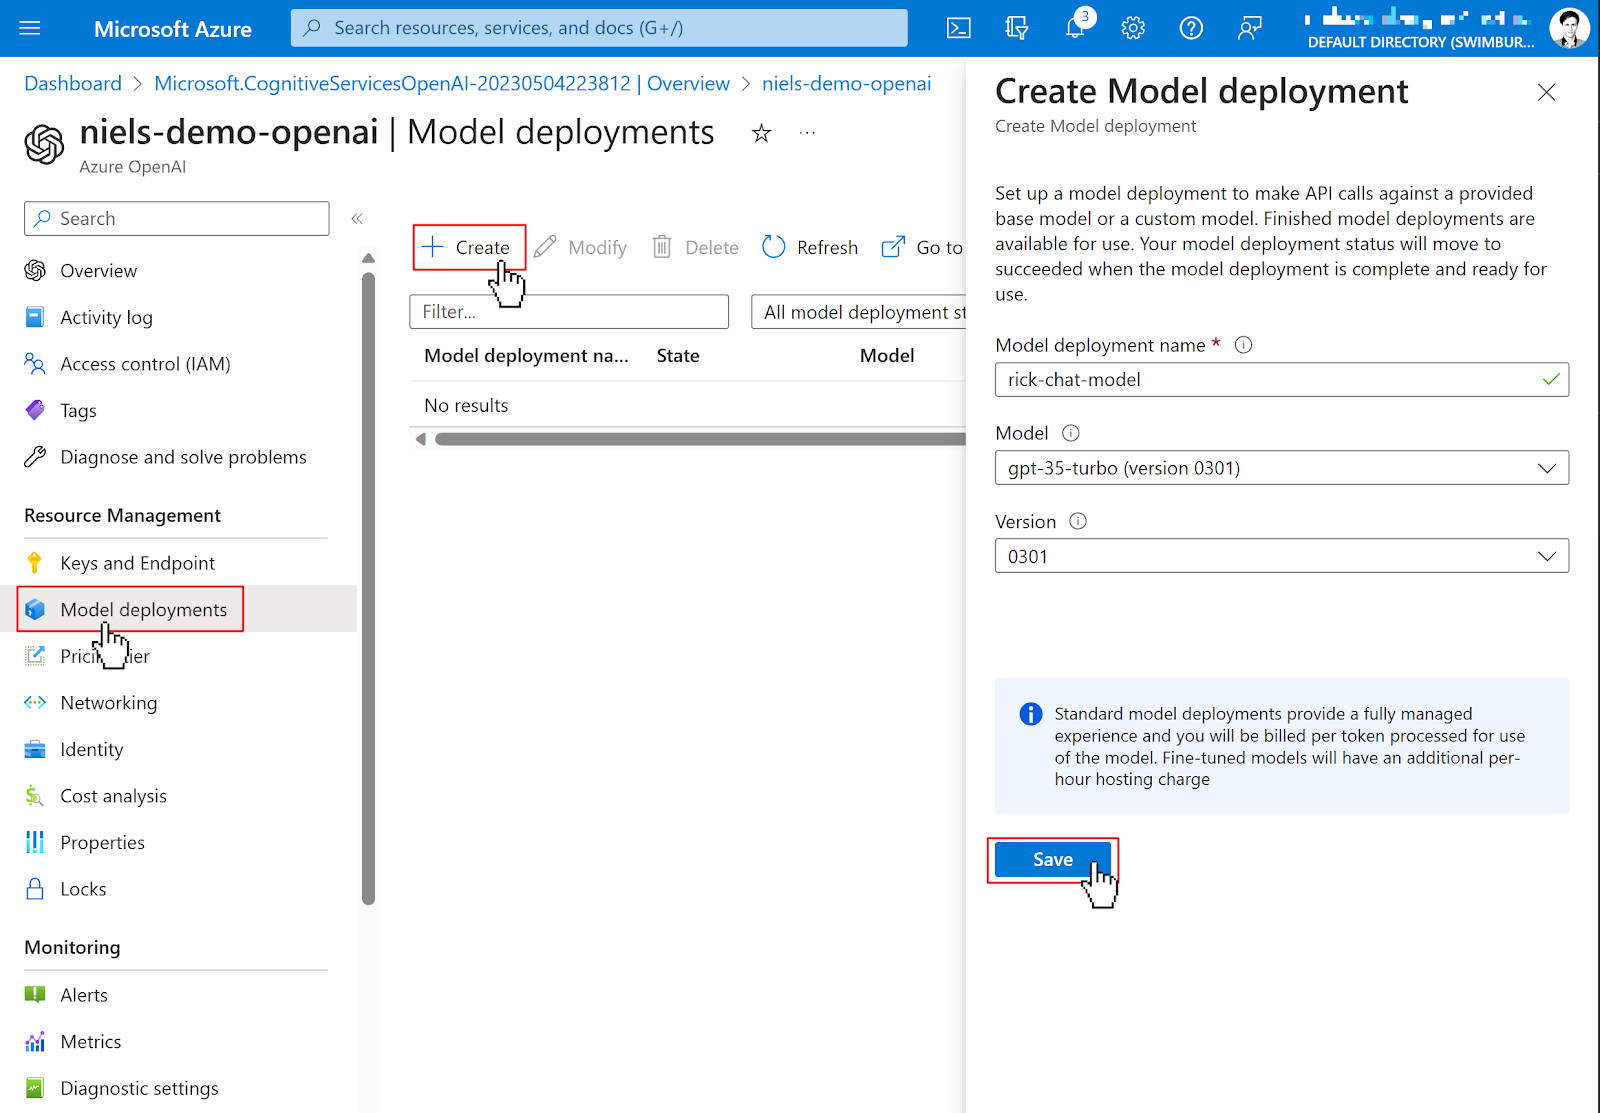 User navigates to the Model deployments tab using the left side navigation of the Azure OpenAI service. User then clicks Create button which opens the Create Model deployment modal. User fills out the form as described below, and clicks the Save button.